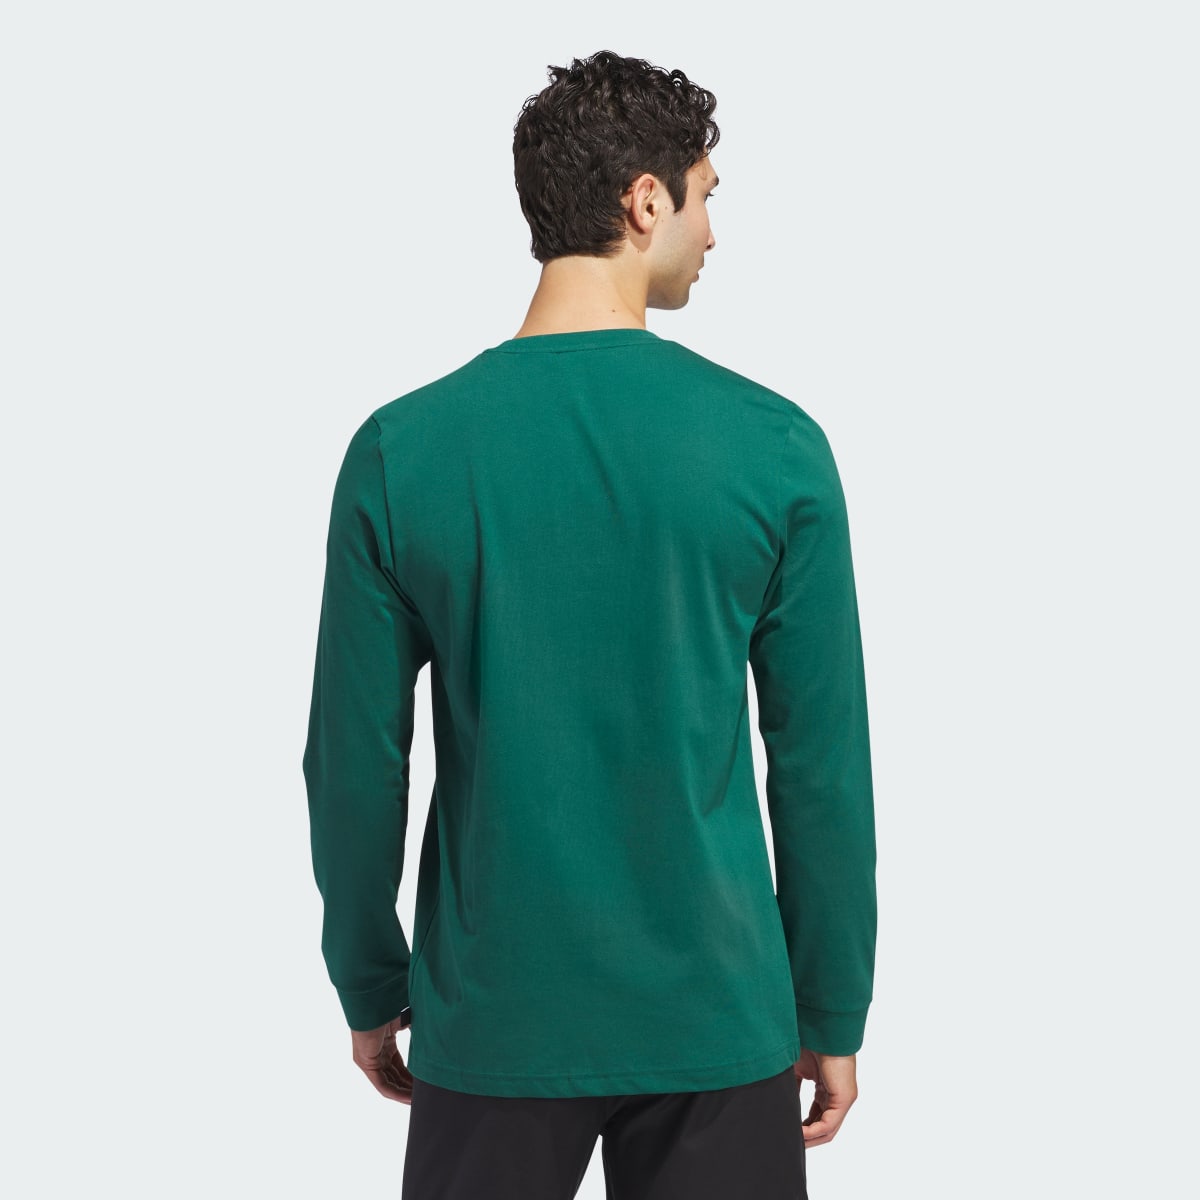 Adidas Go-To Crest Graphic Long Sleeve Tee. 5